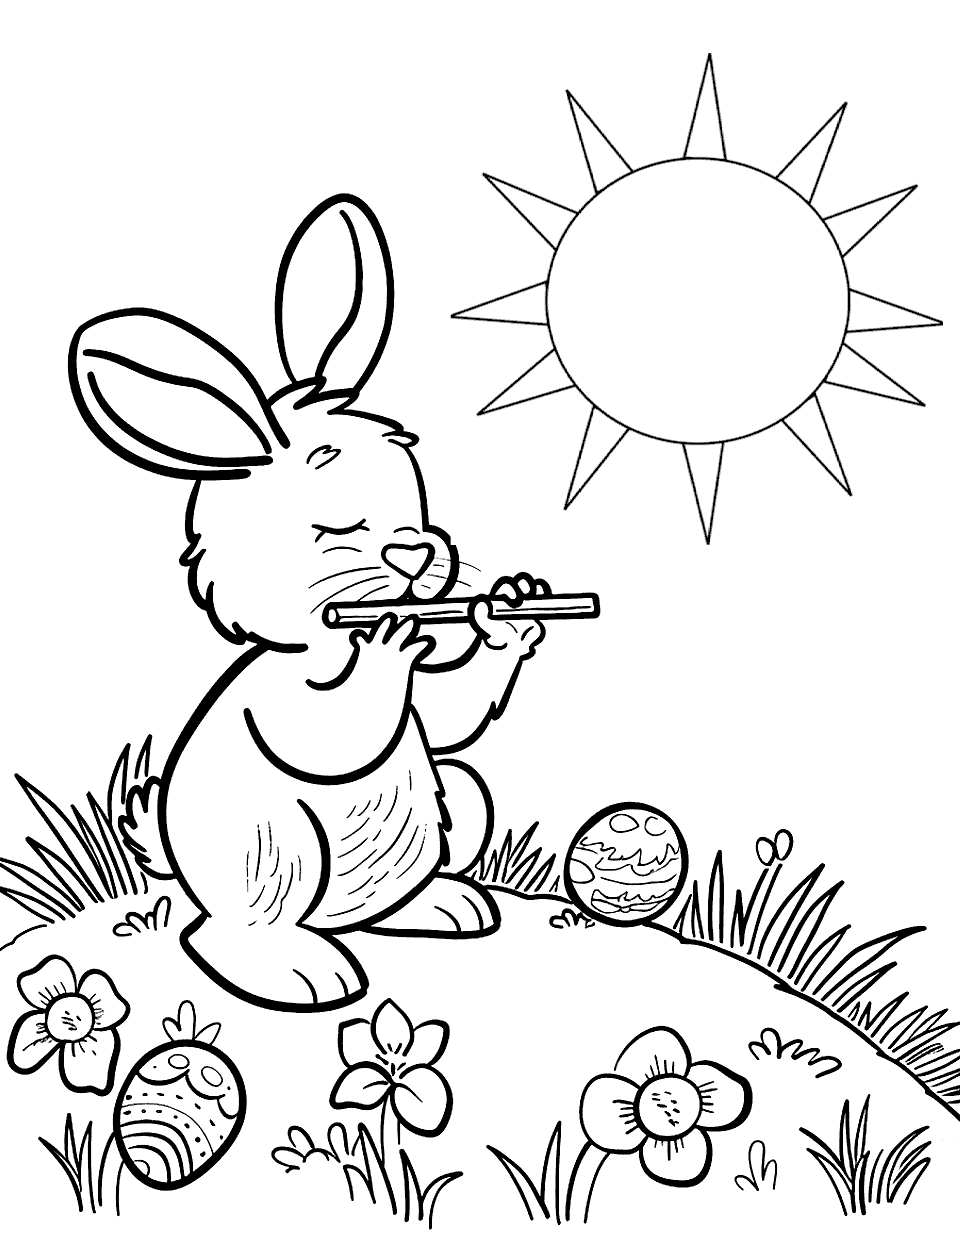 Sunset Serenade Easter Bunny Coloring Page - A bunny sitting on a hill, playing a flute as the sun sets, with Easter eggs placed around like an audience.